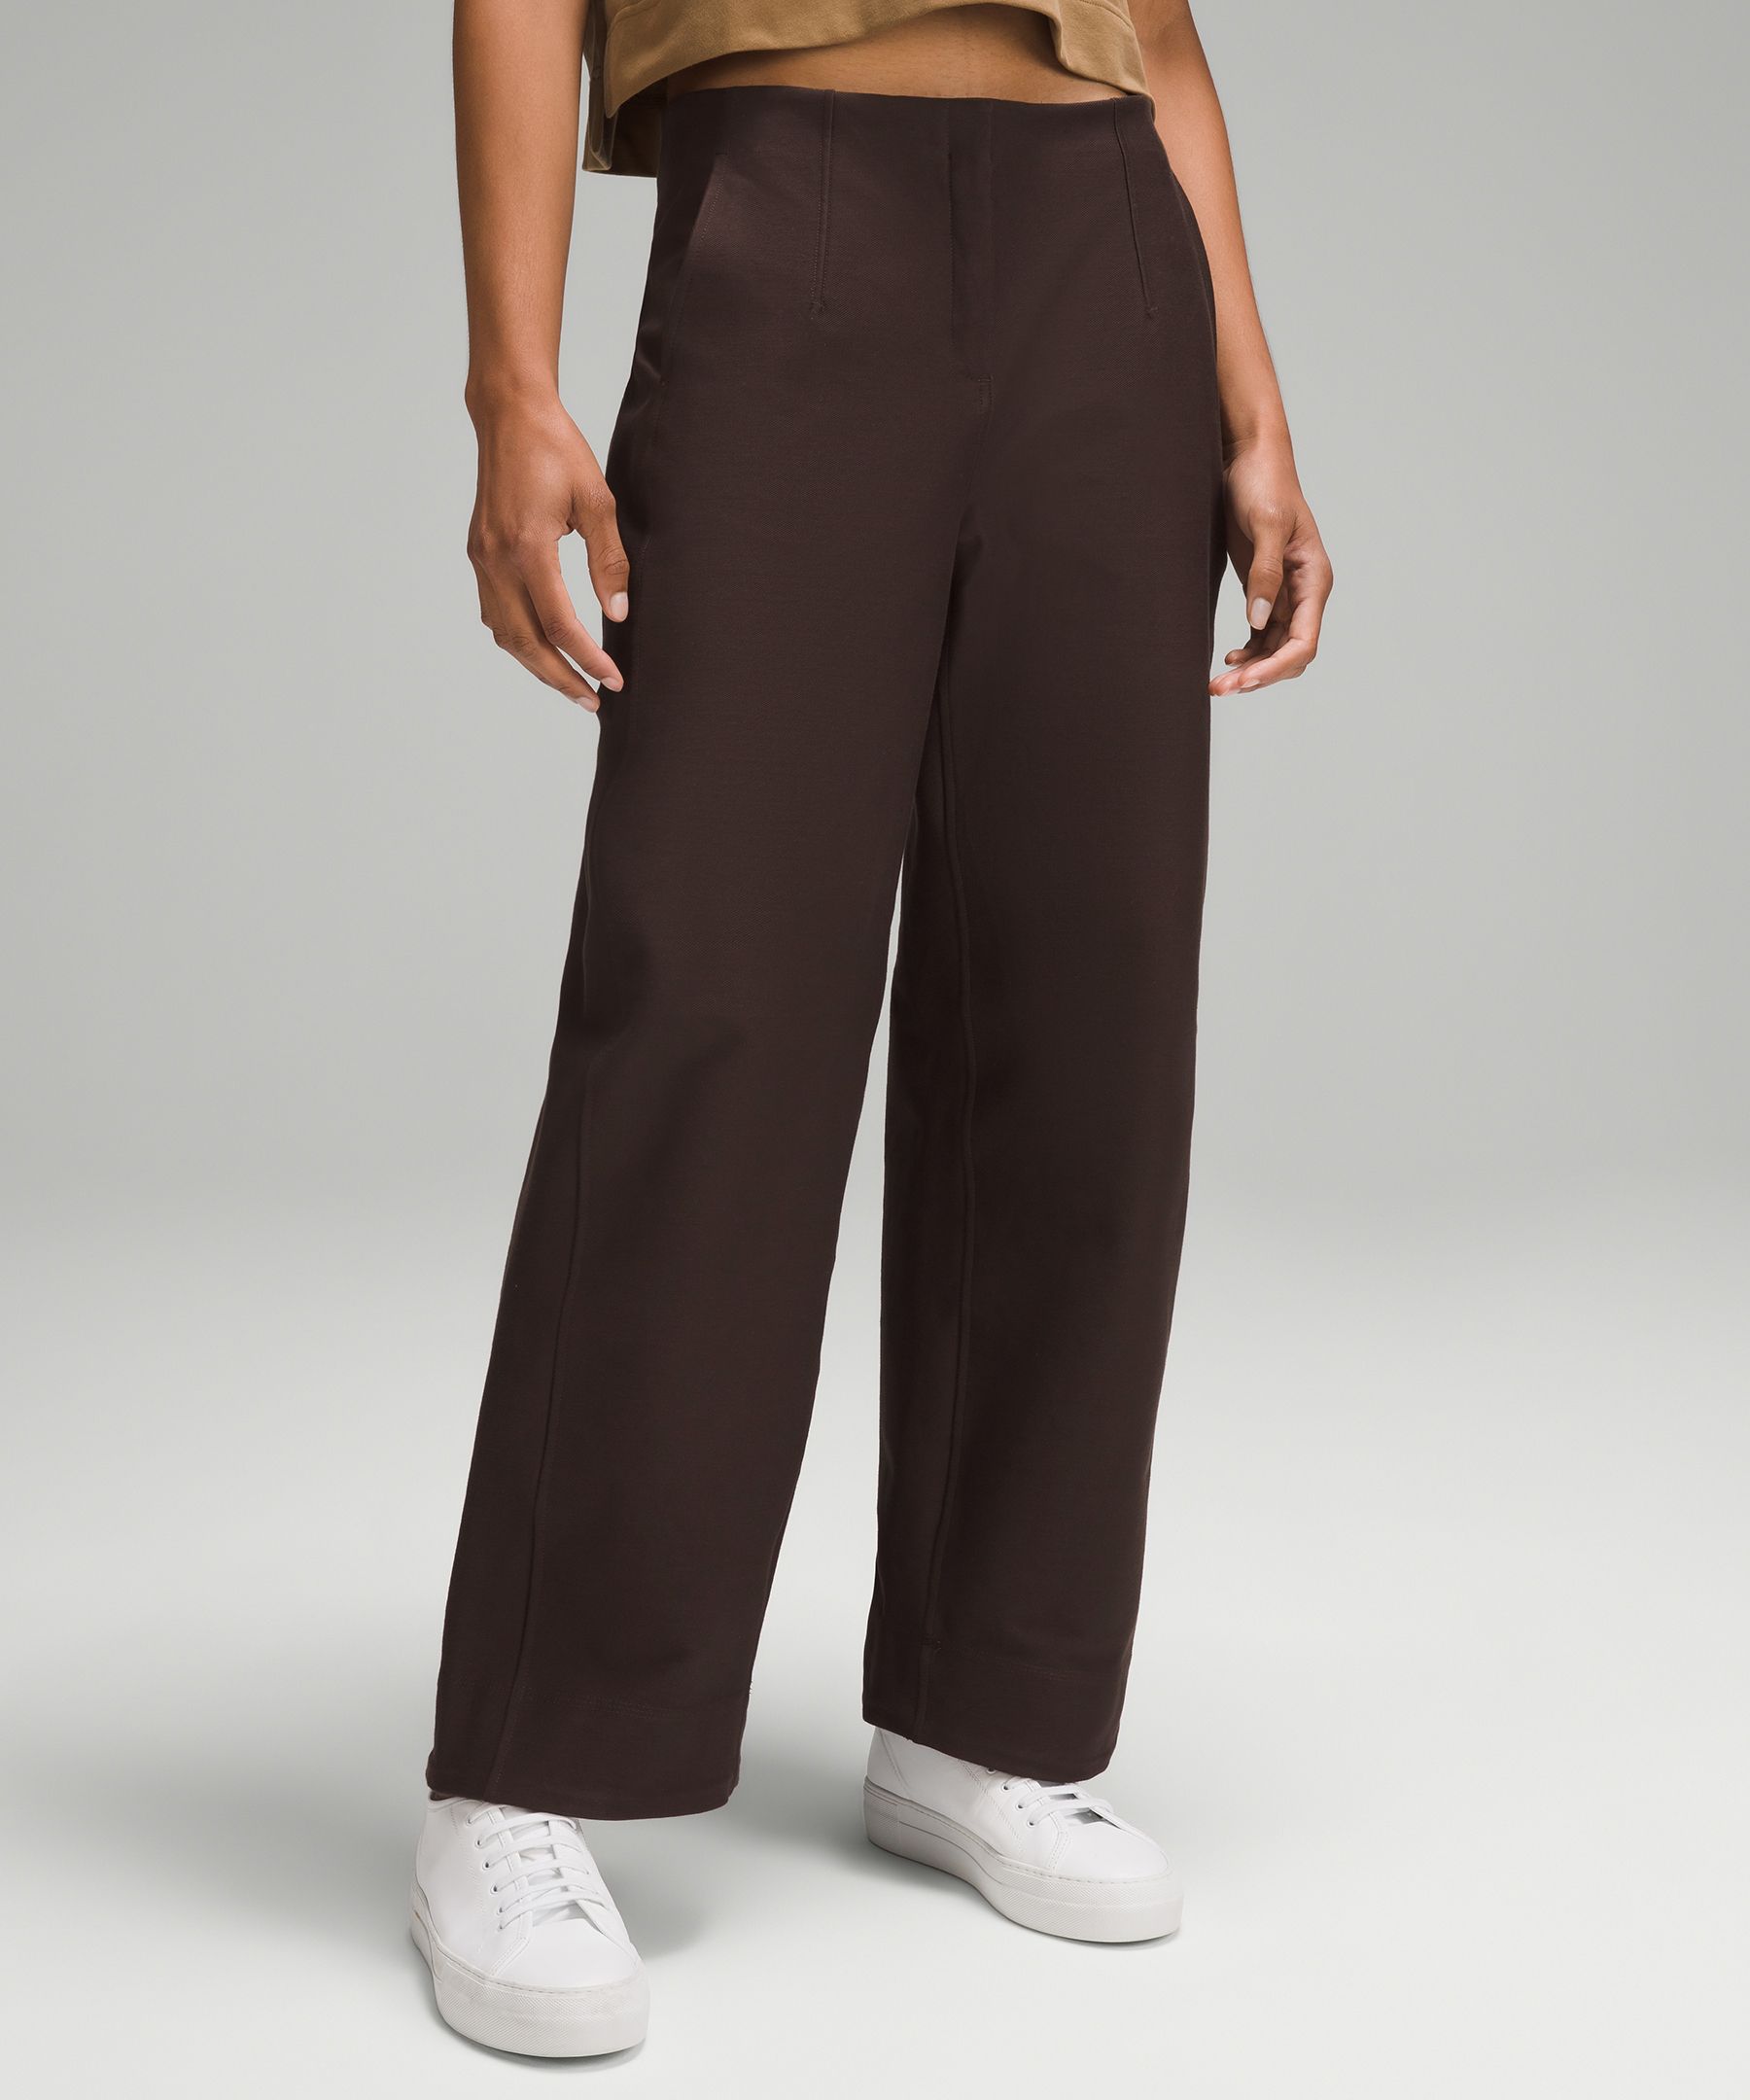 Lululemon ABC Relaxed-Fit Cropped Pants Utilitech - ShopStyle